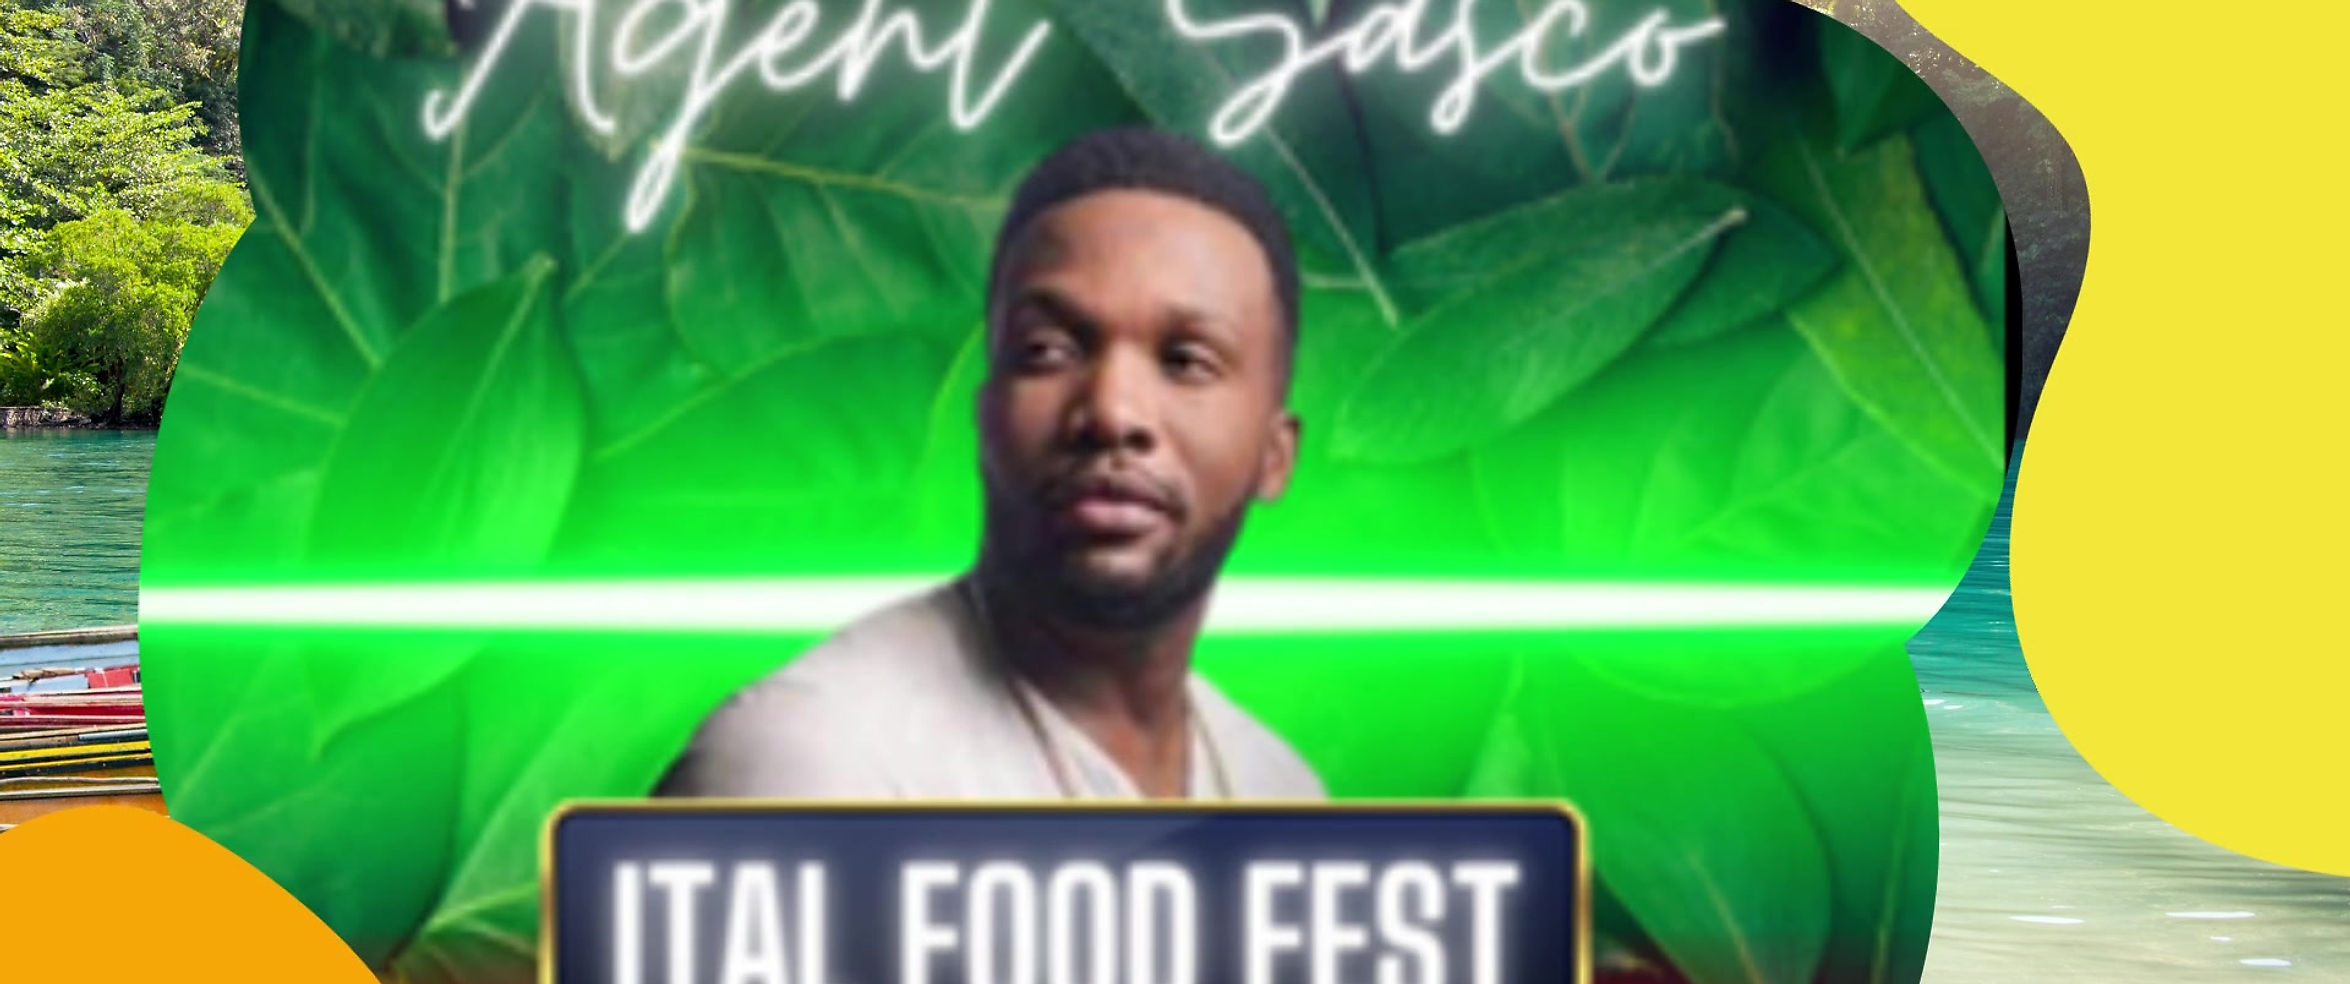 FINAL Ital Food Fest Youtube Video Ad (1)